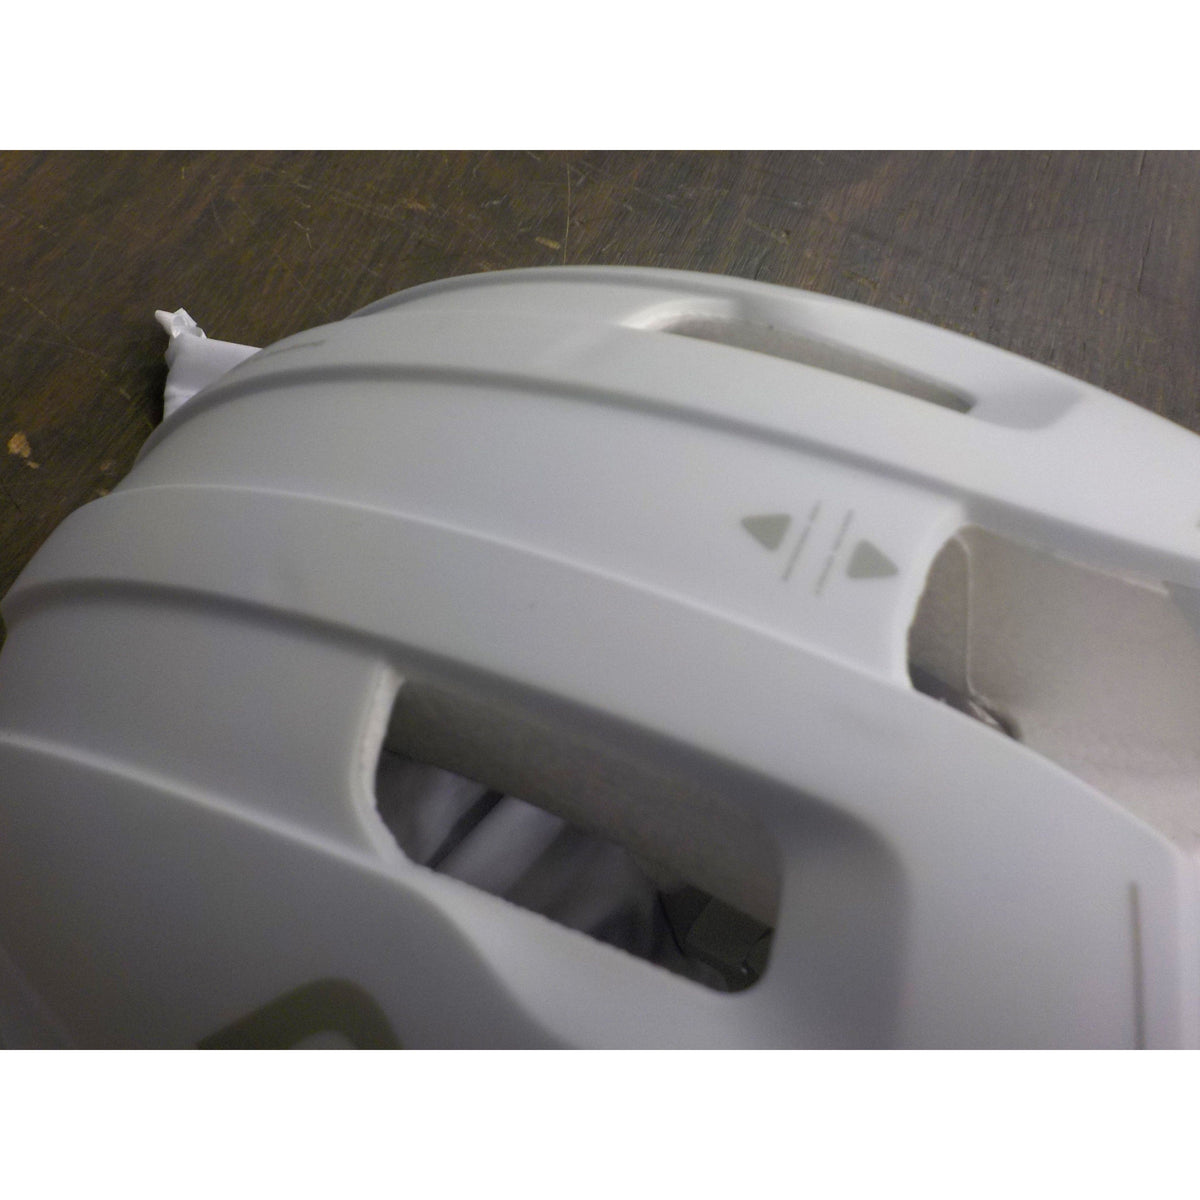 POC Sports Ventral Mips (Cpsc) Helmet - Hydrogen White Matt - Large - Used - Acceptable